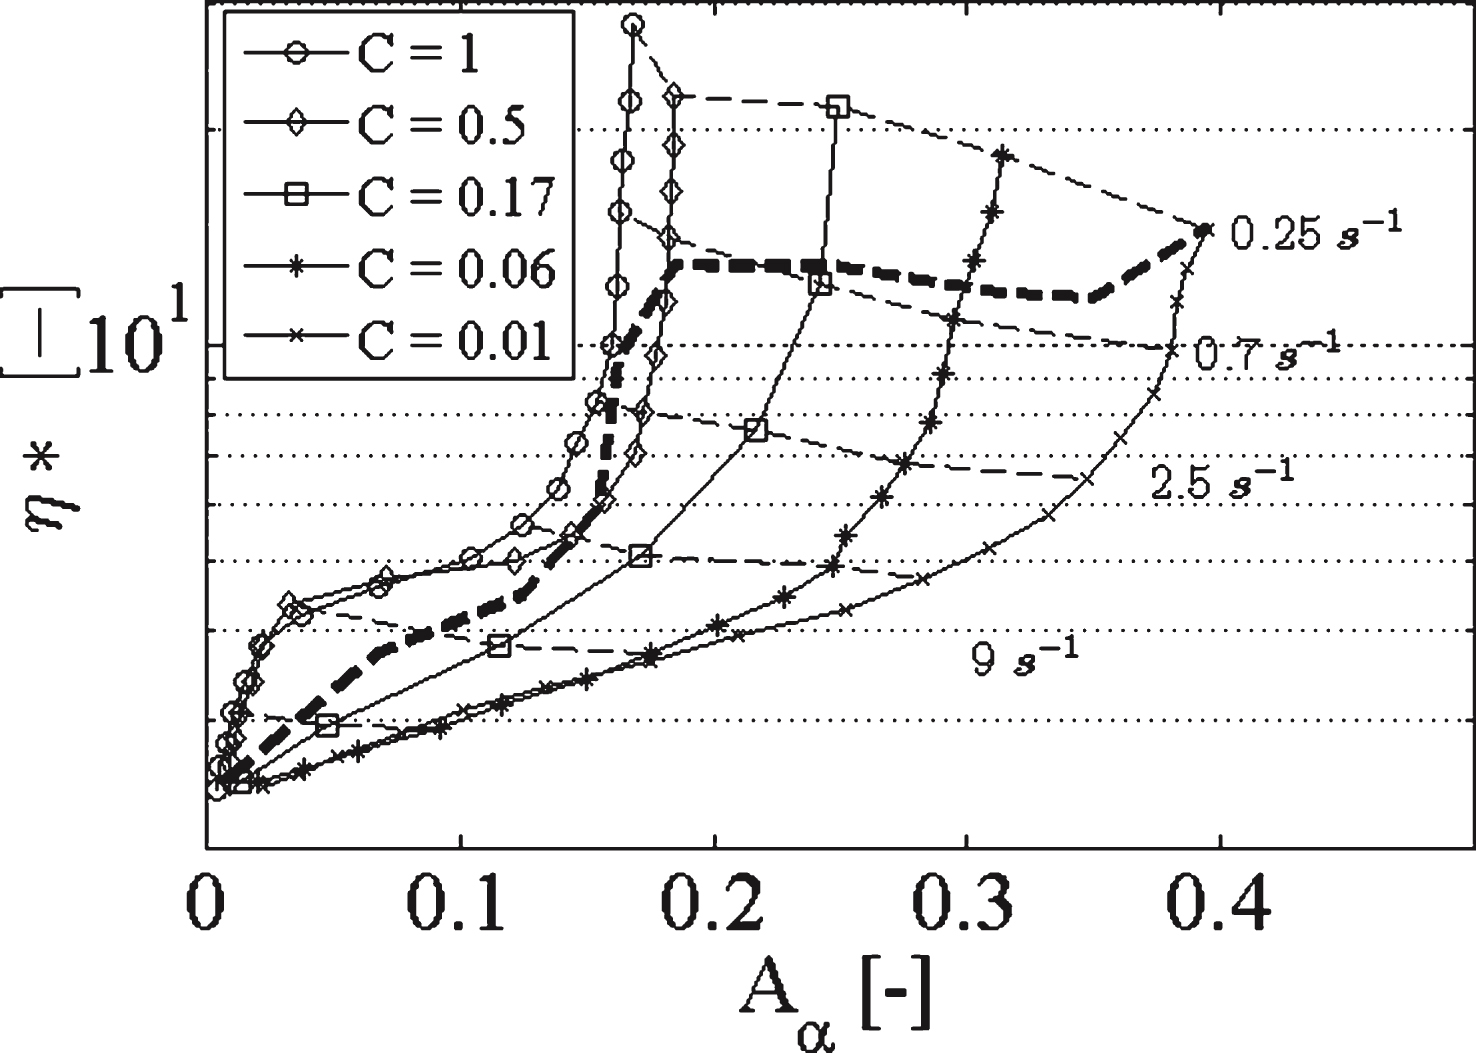 Relative viscosity η* = η/ηp against aggregation Aα plotted for all C numbers. The dashed lines are iso-shear rate lines presenting the values of viscosity at same shear rates. The heavier dashed line represents the mean value of viscosity from all viscosity values at a given Aα value (data adapted from [22]).